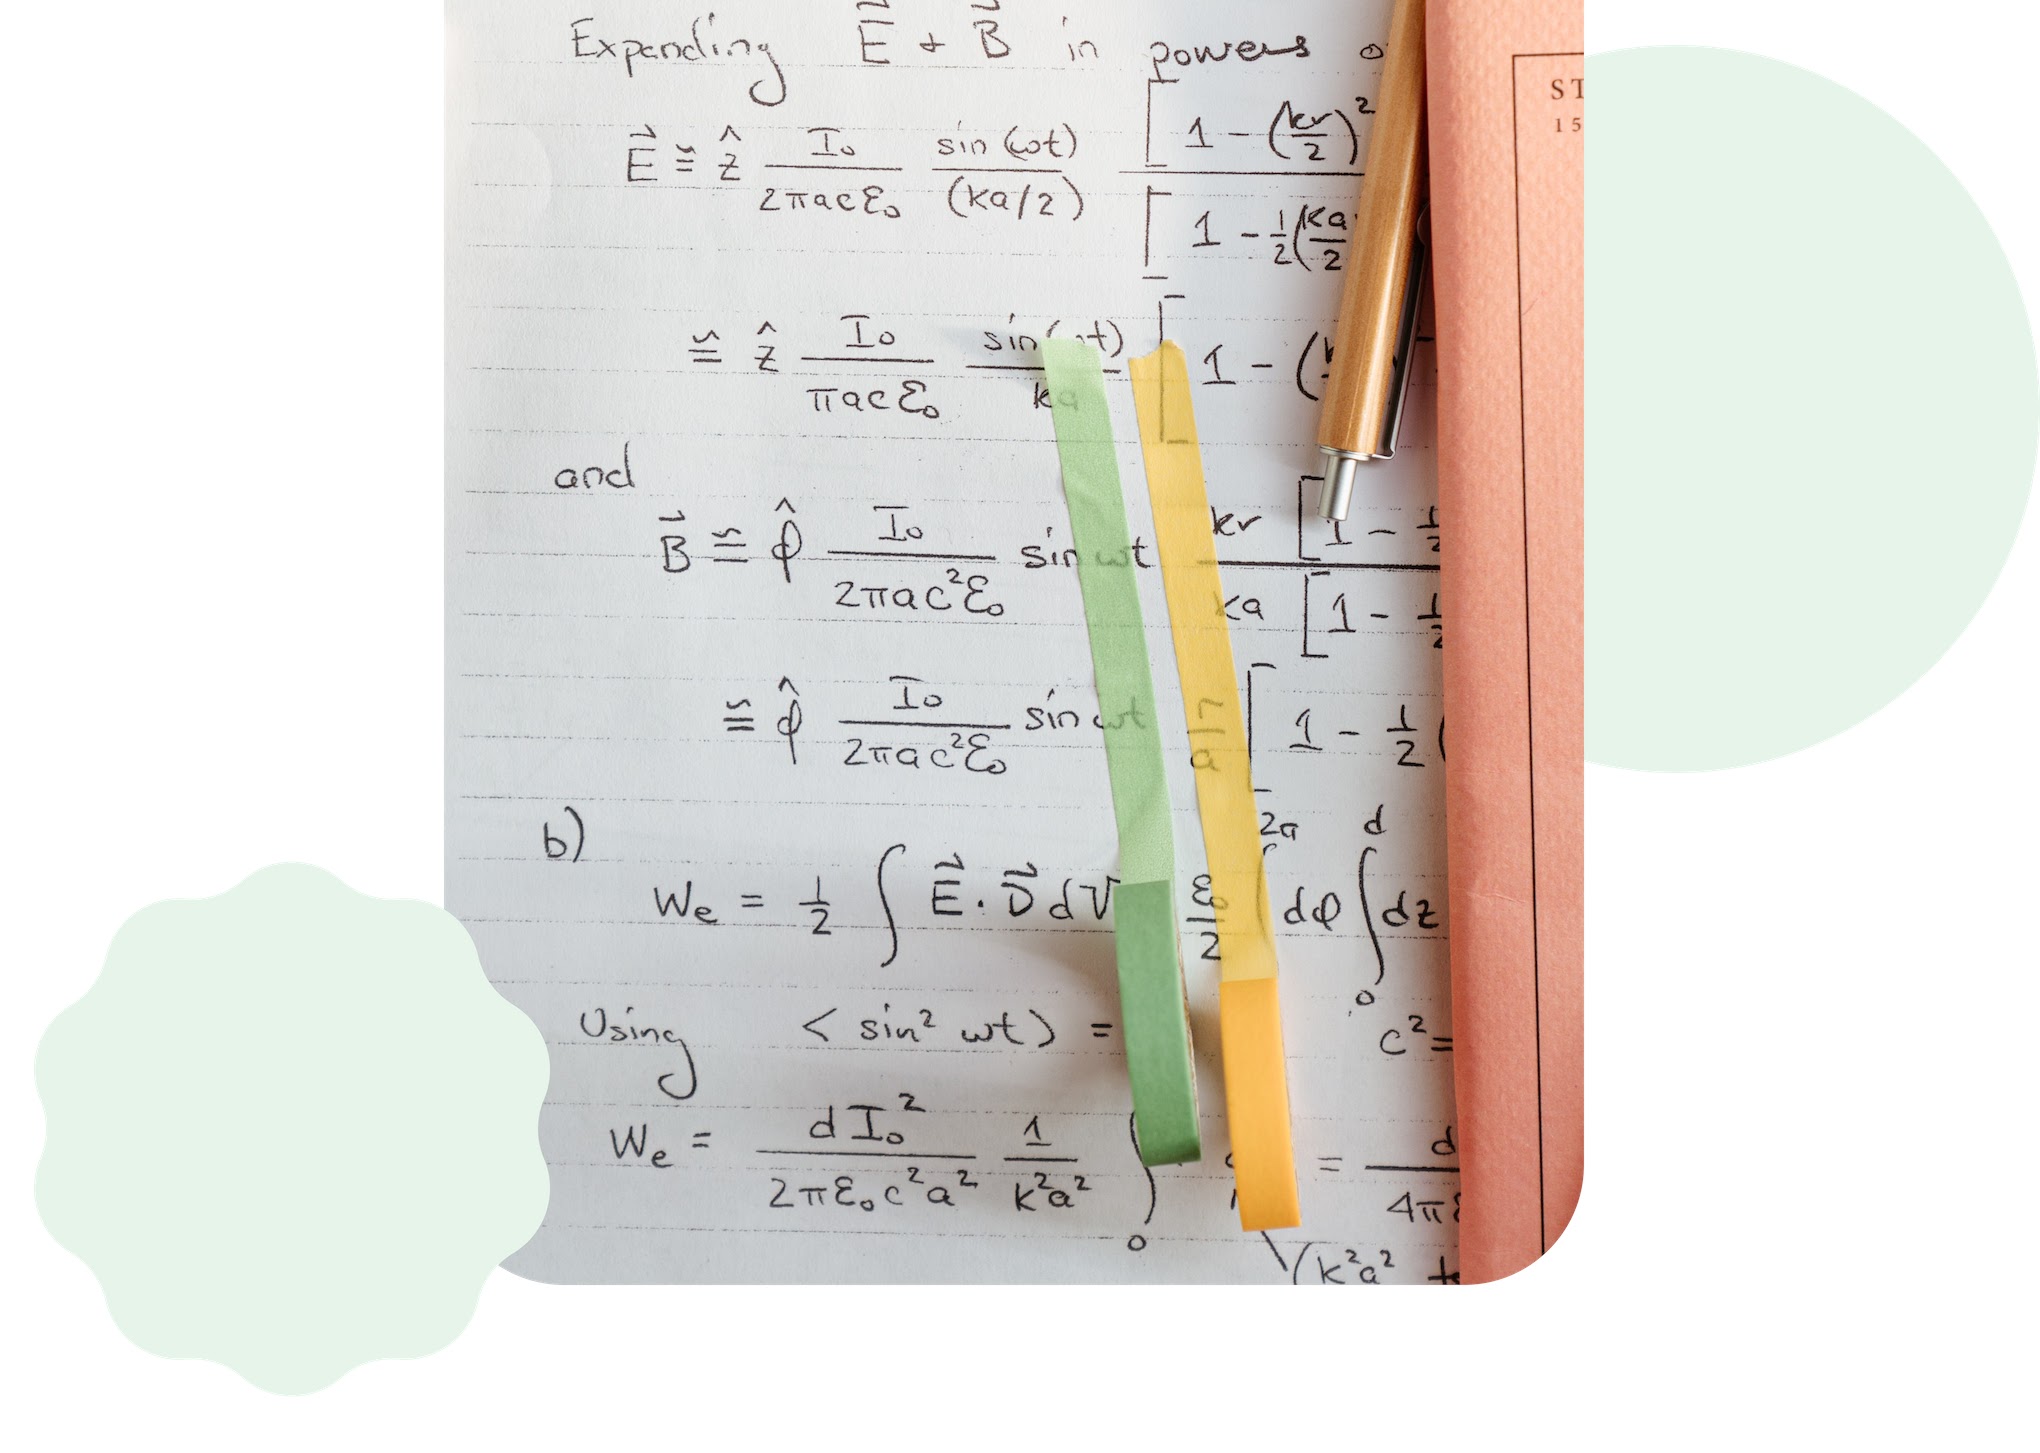 An image of a Lens homework use case showing math written on a piece of paper with overlaying green shapes and a Lens logo.